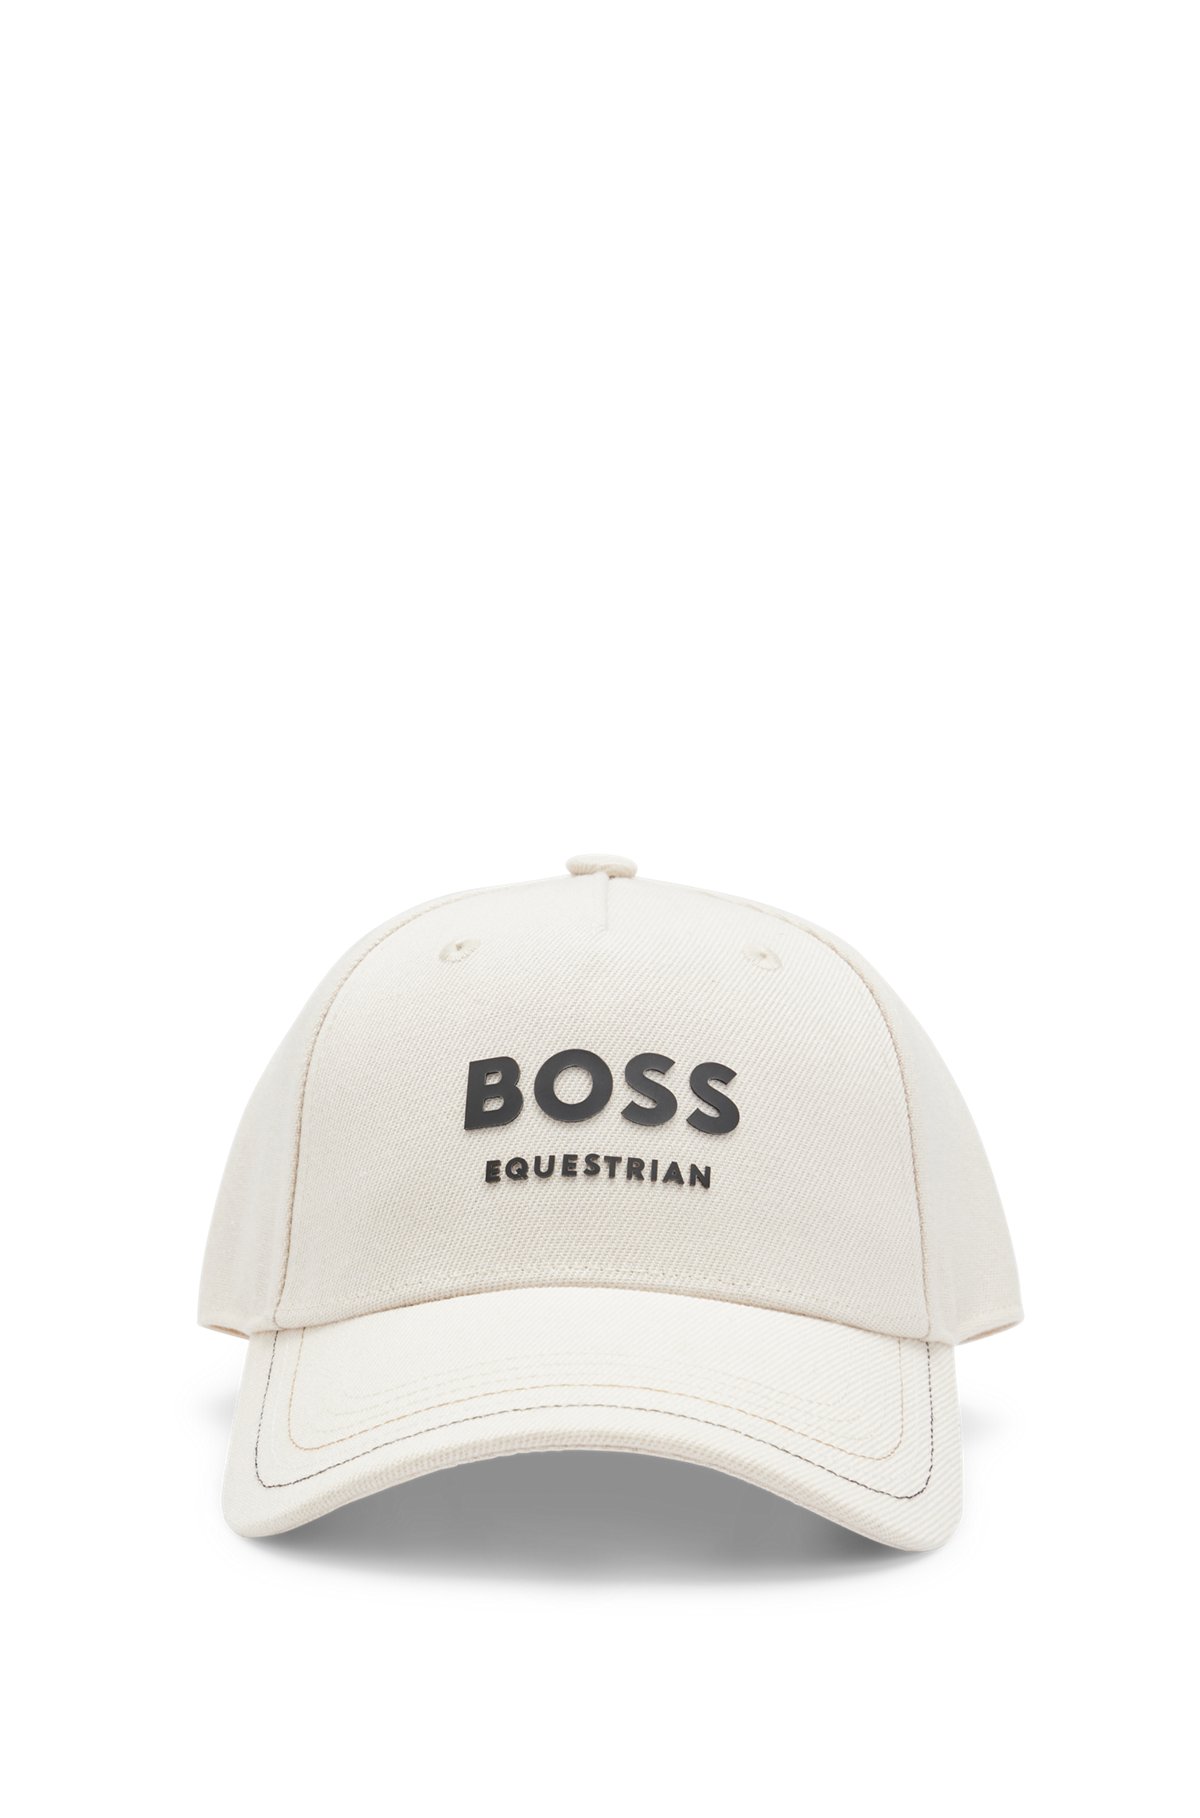 BOSS - Equestrian five-panel cap with logo details